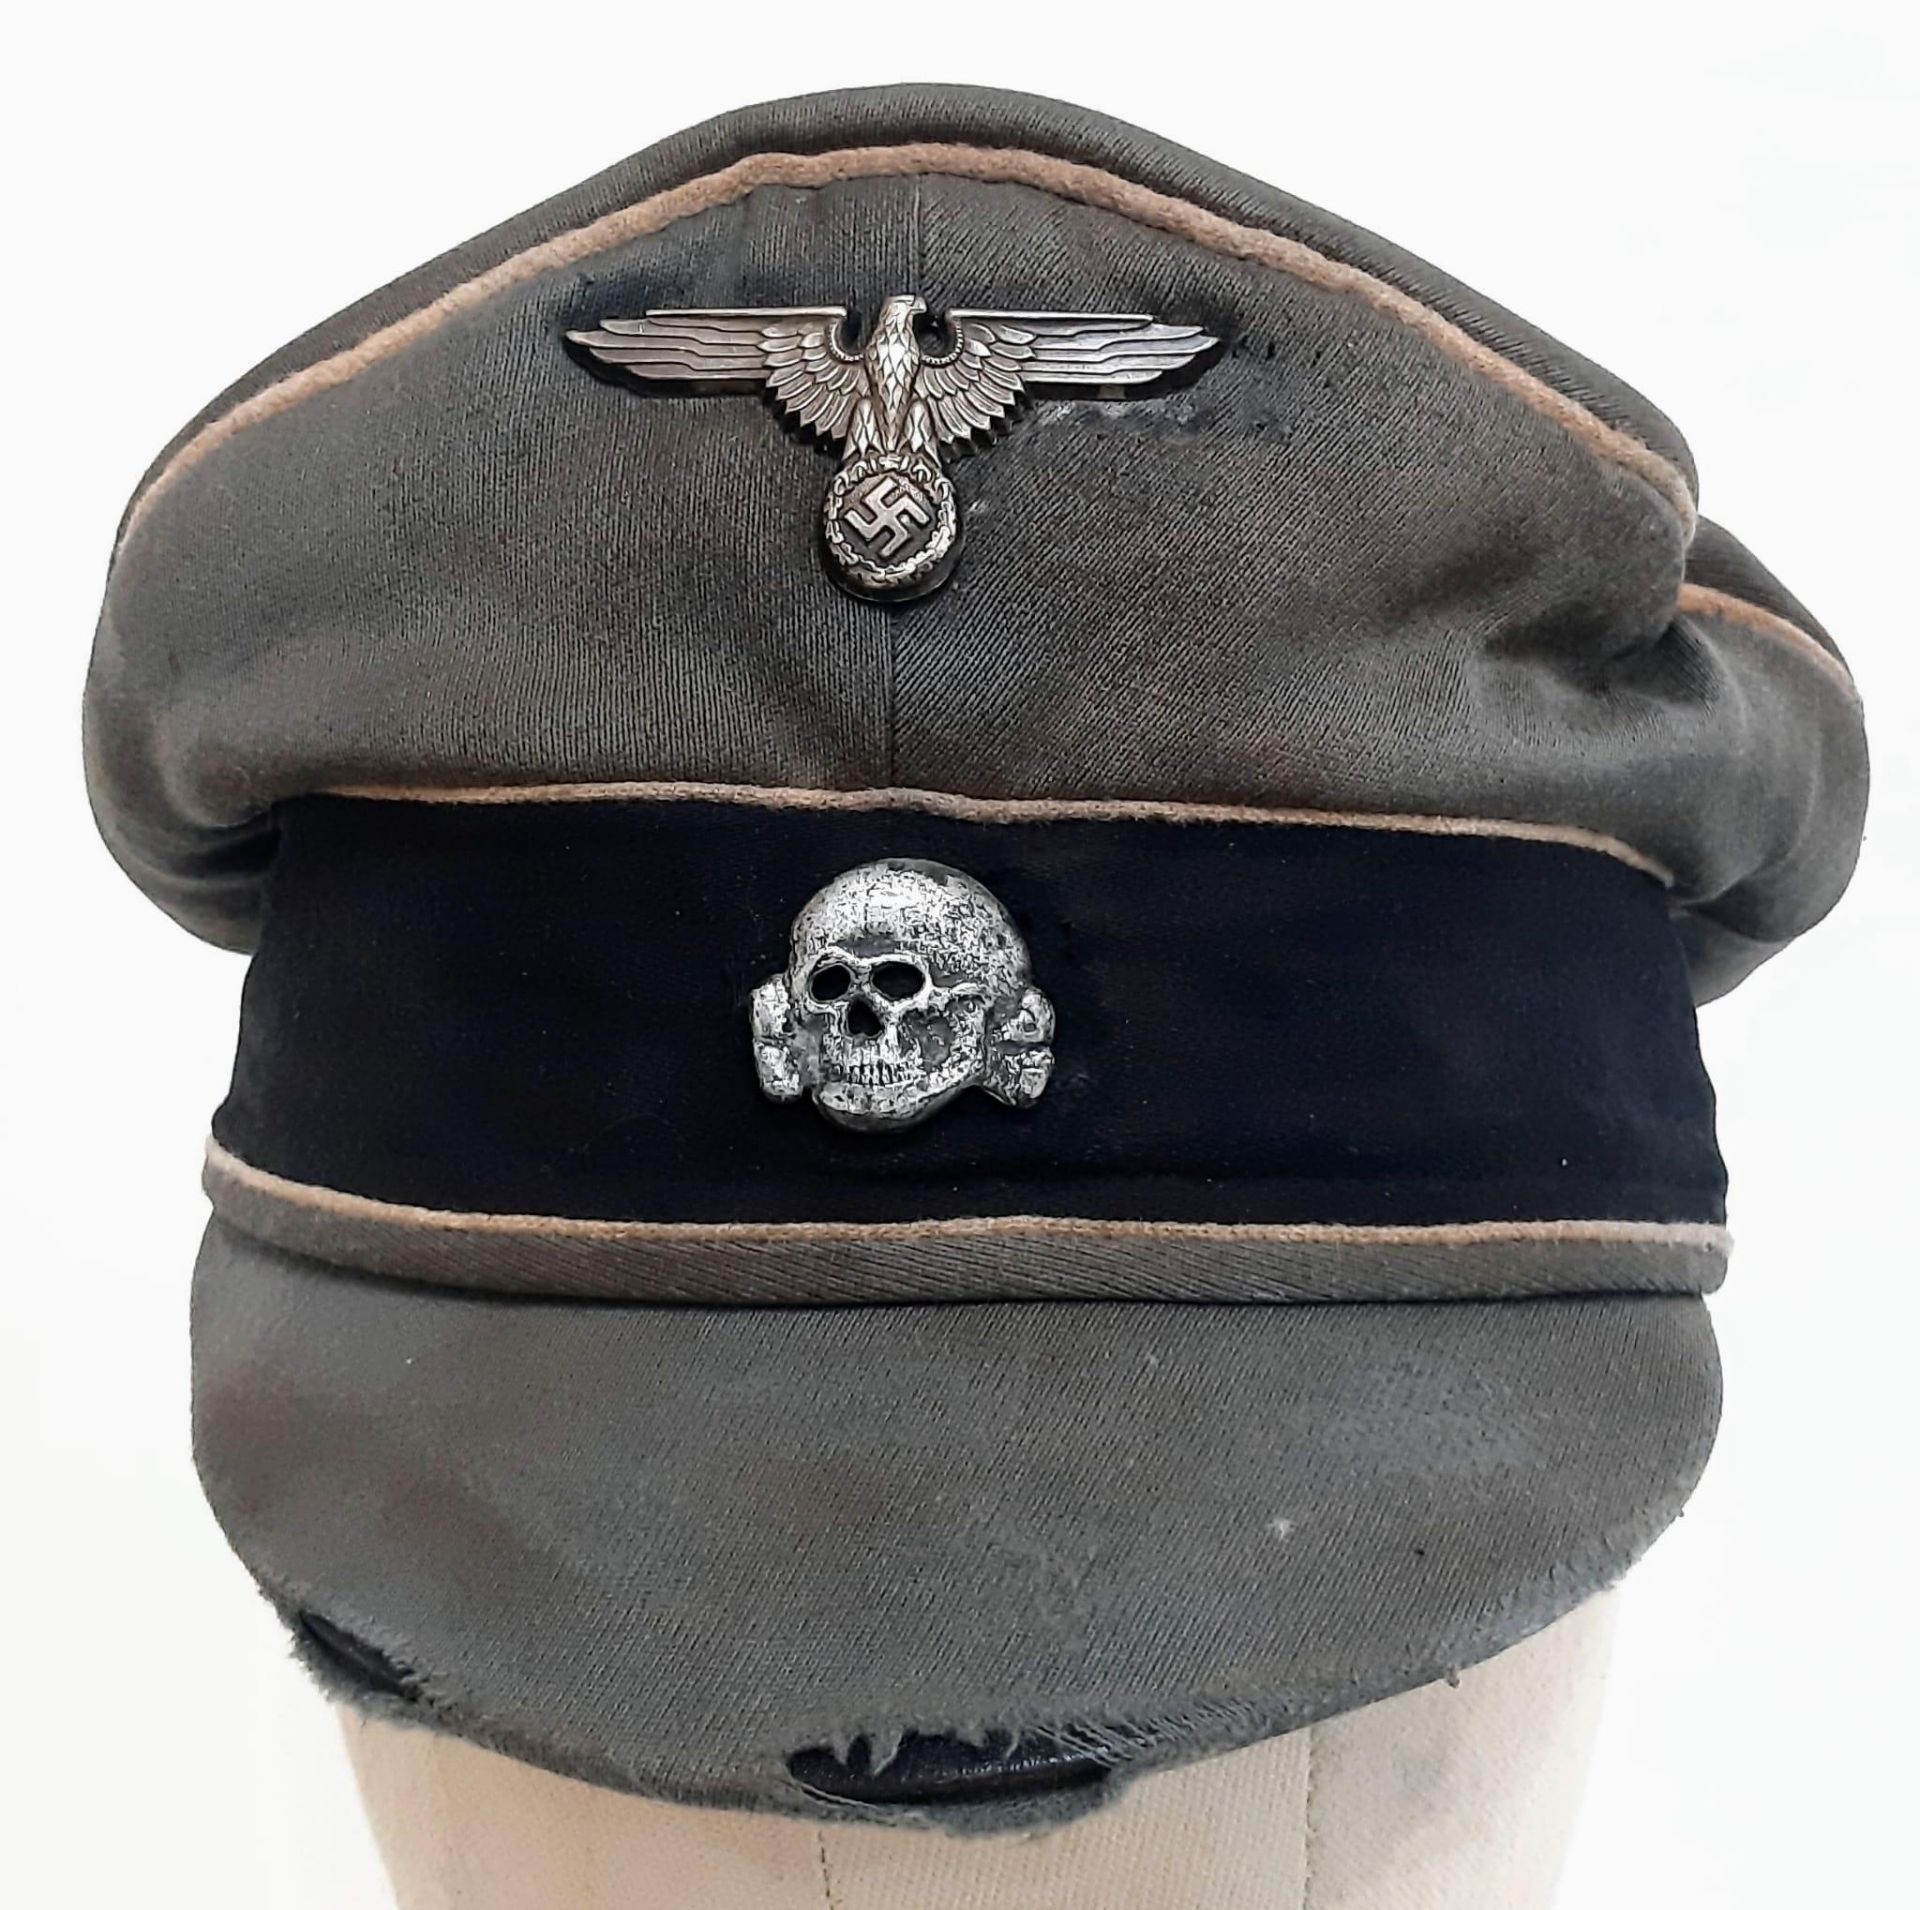 3rd Reich Waffen SS Trikot Crusher Cap with White Piping. A real “been there” example.